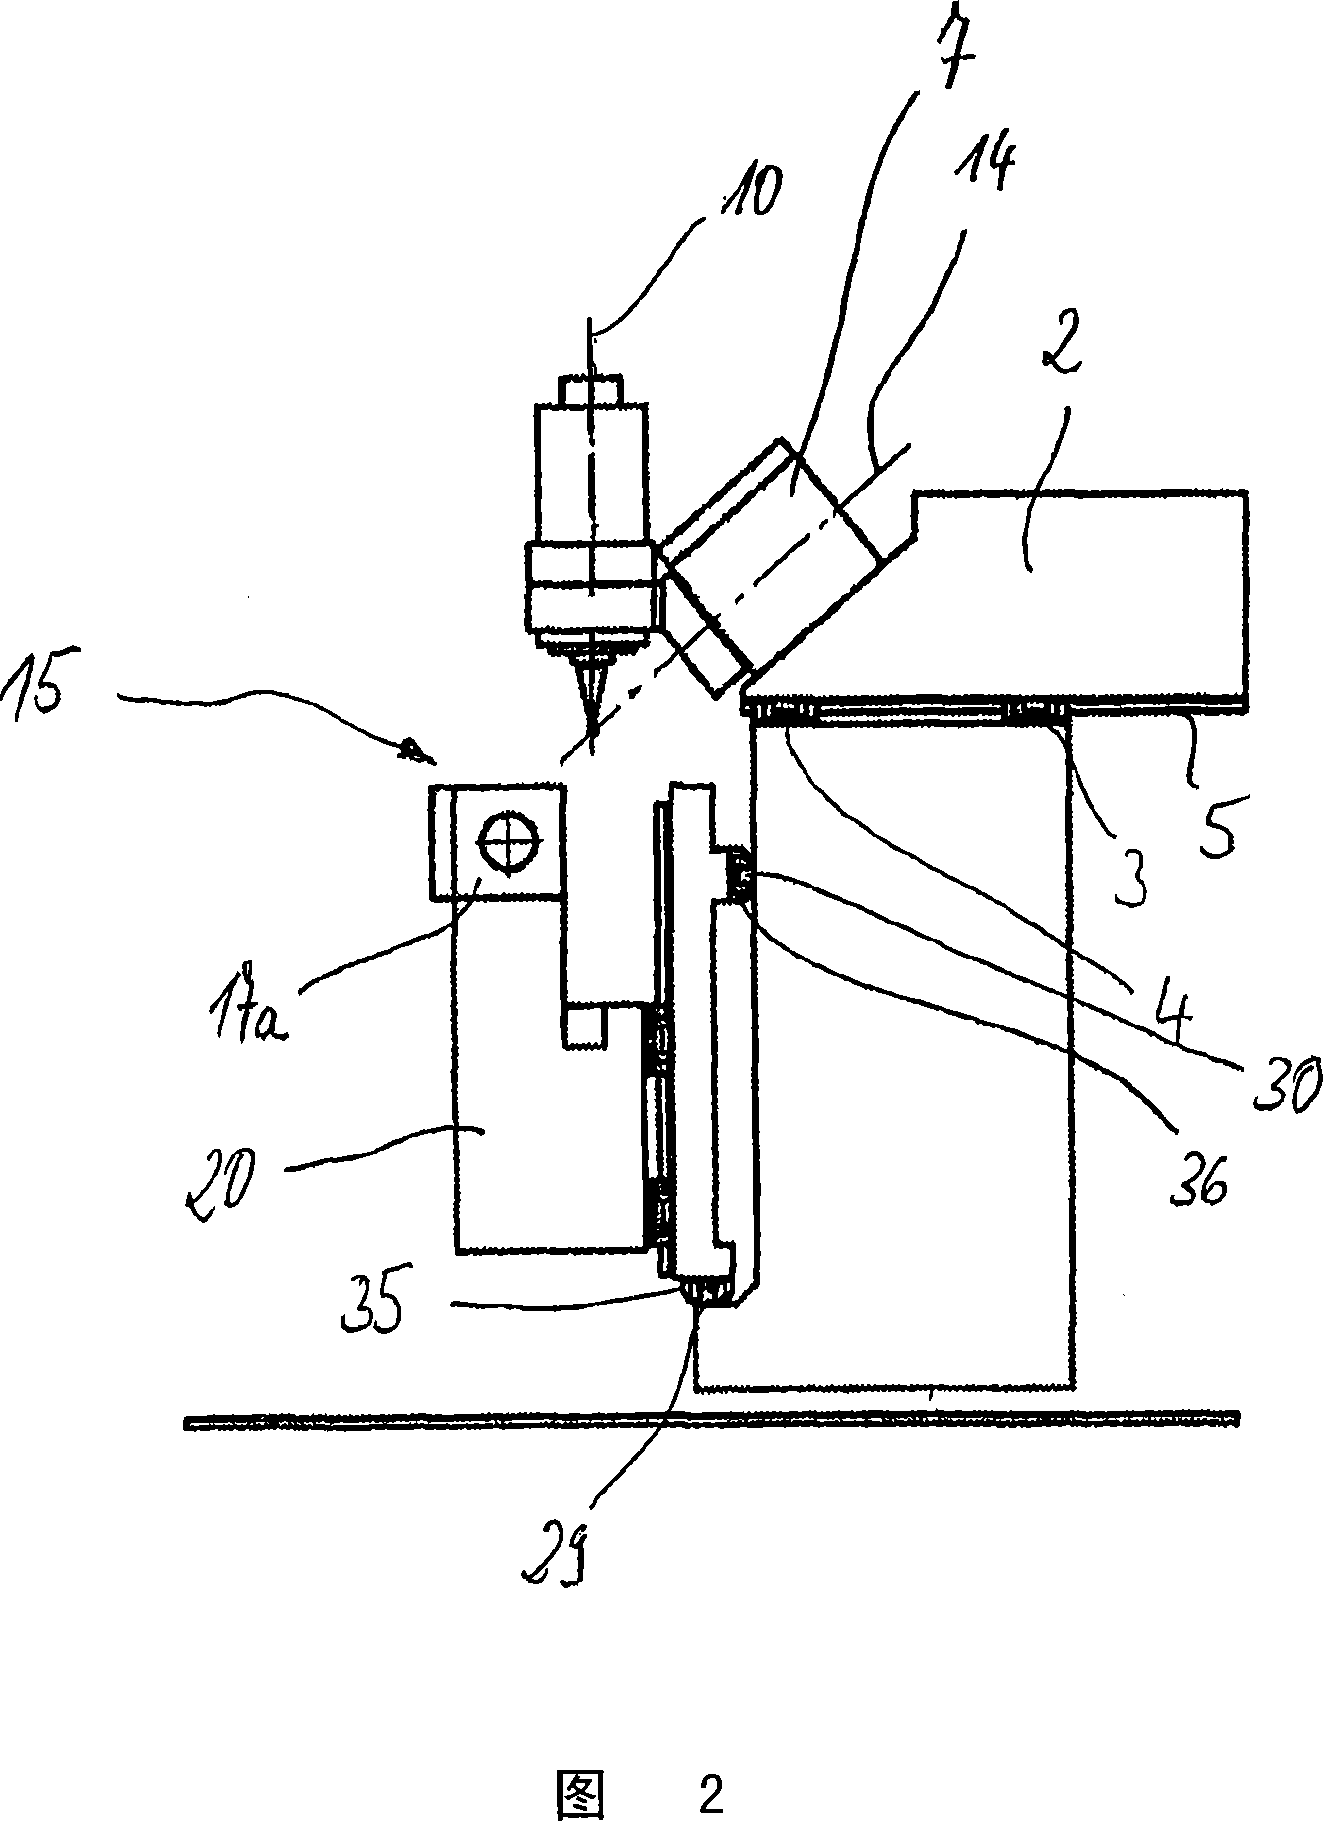 Machine tool with two clamp points on separate carriages